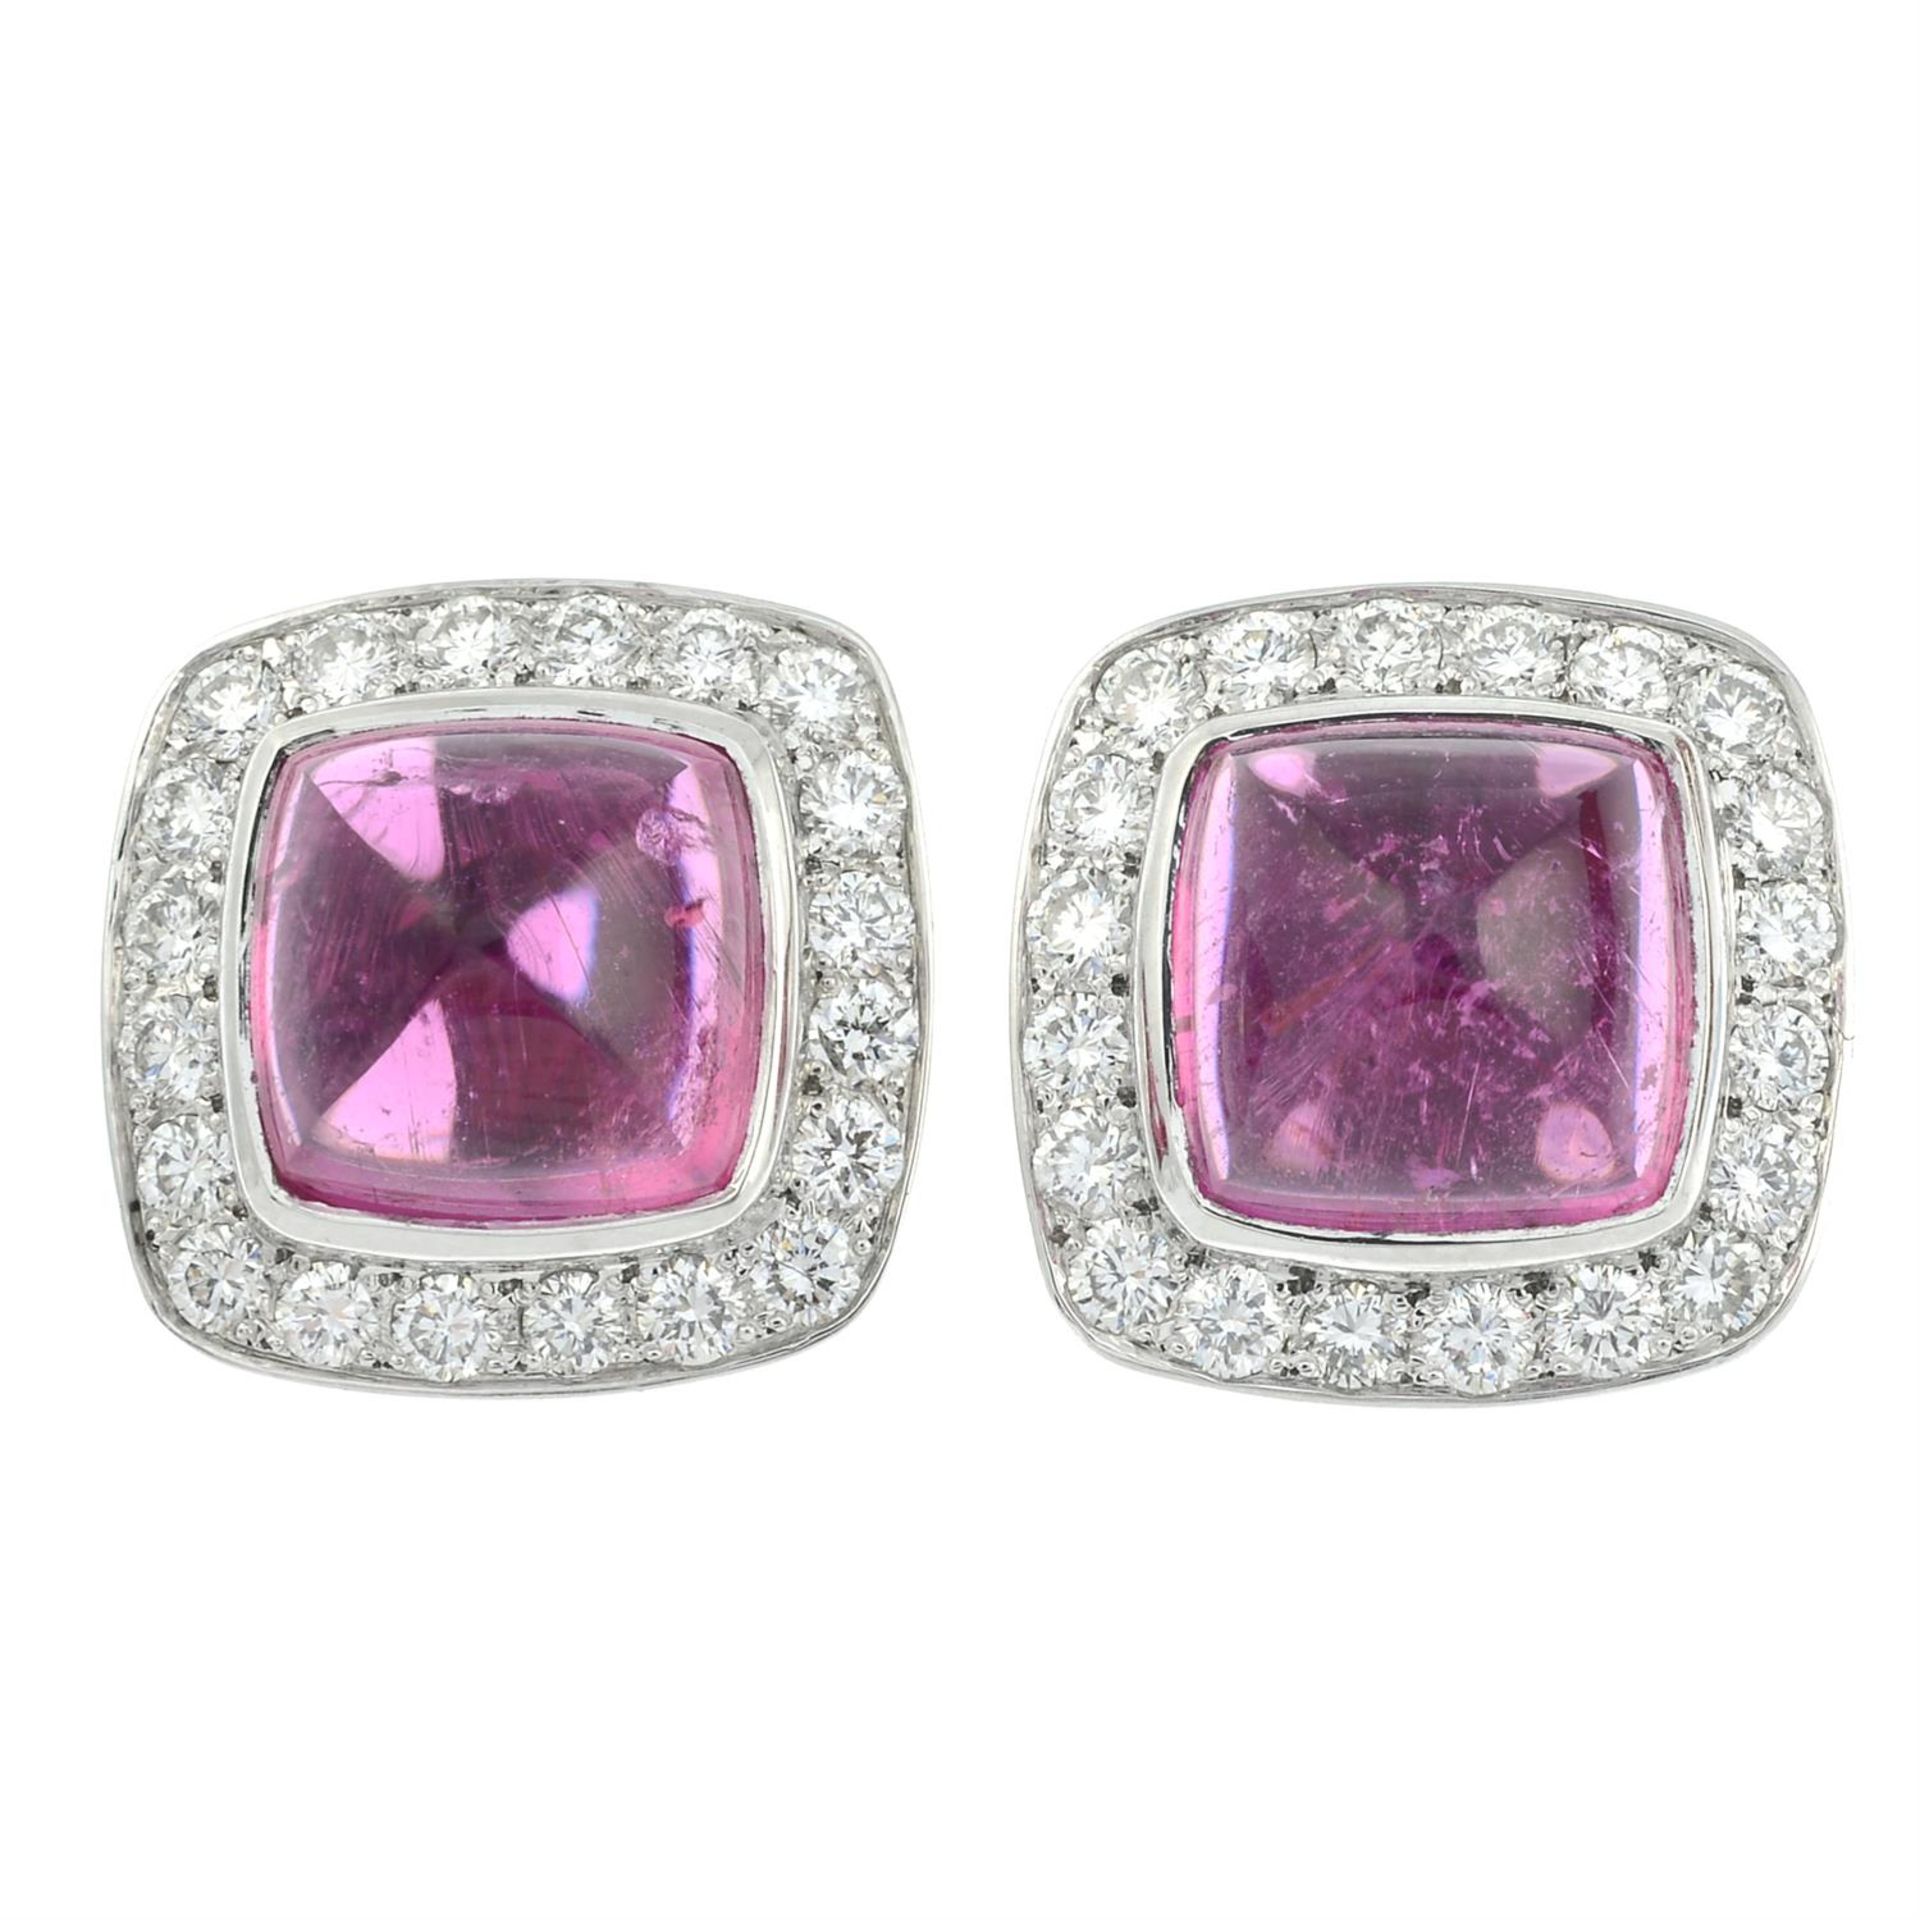 A pair of pink tourmaline cabochon and brilliant-cut diamond earrings. - Image 2 of 3